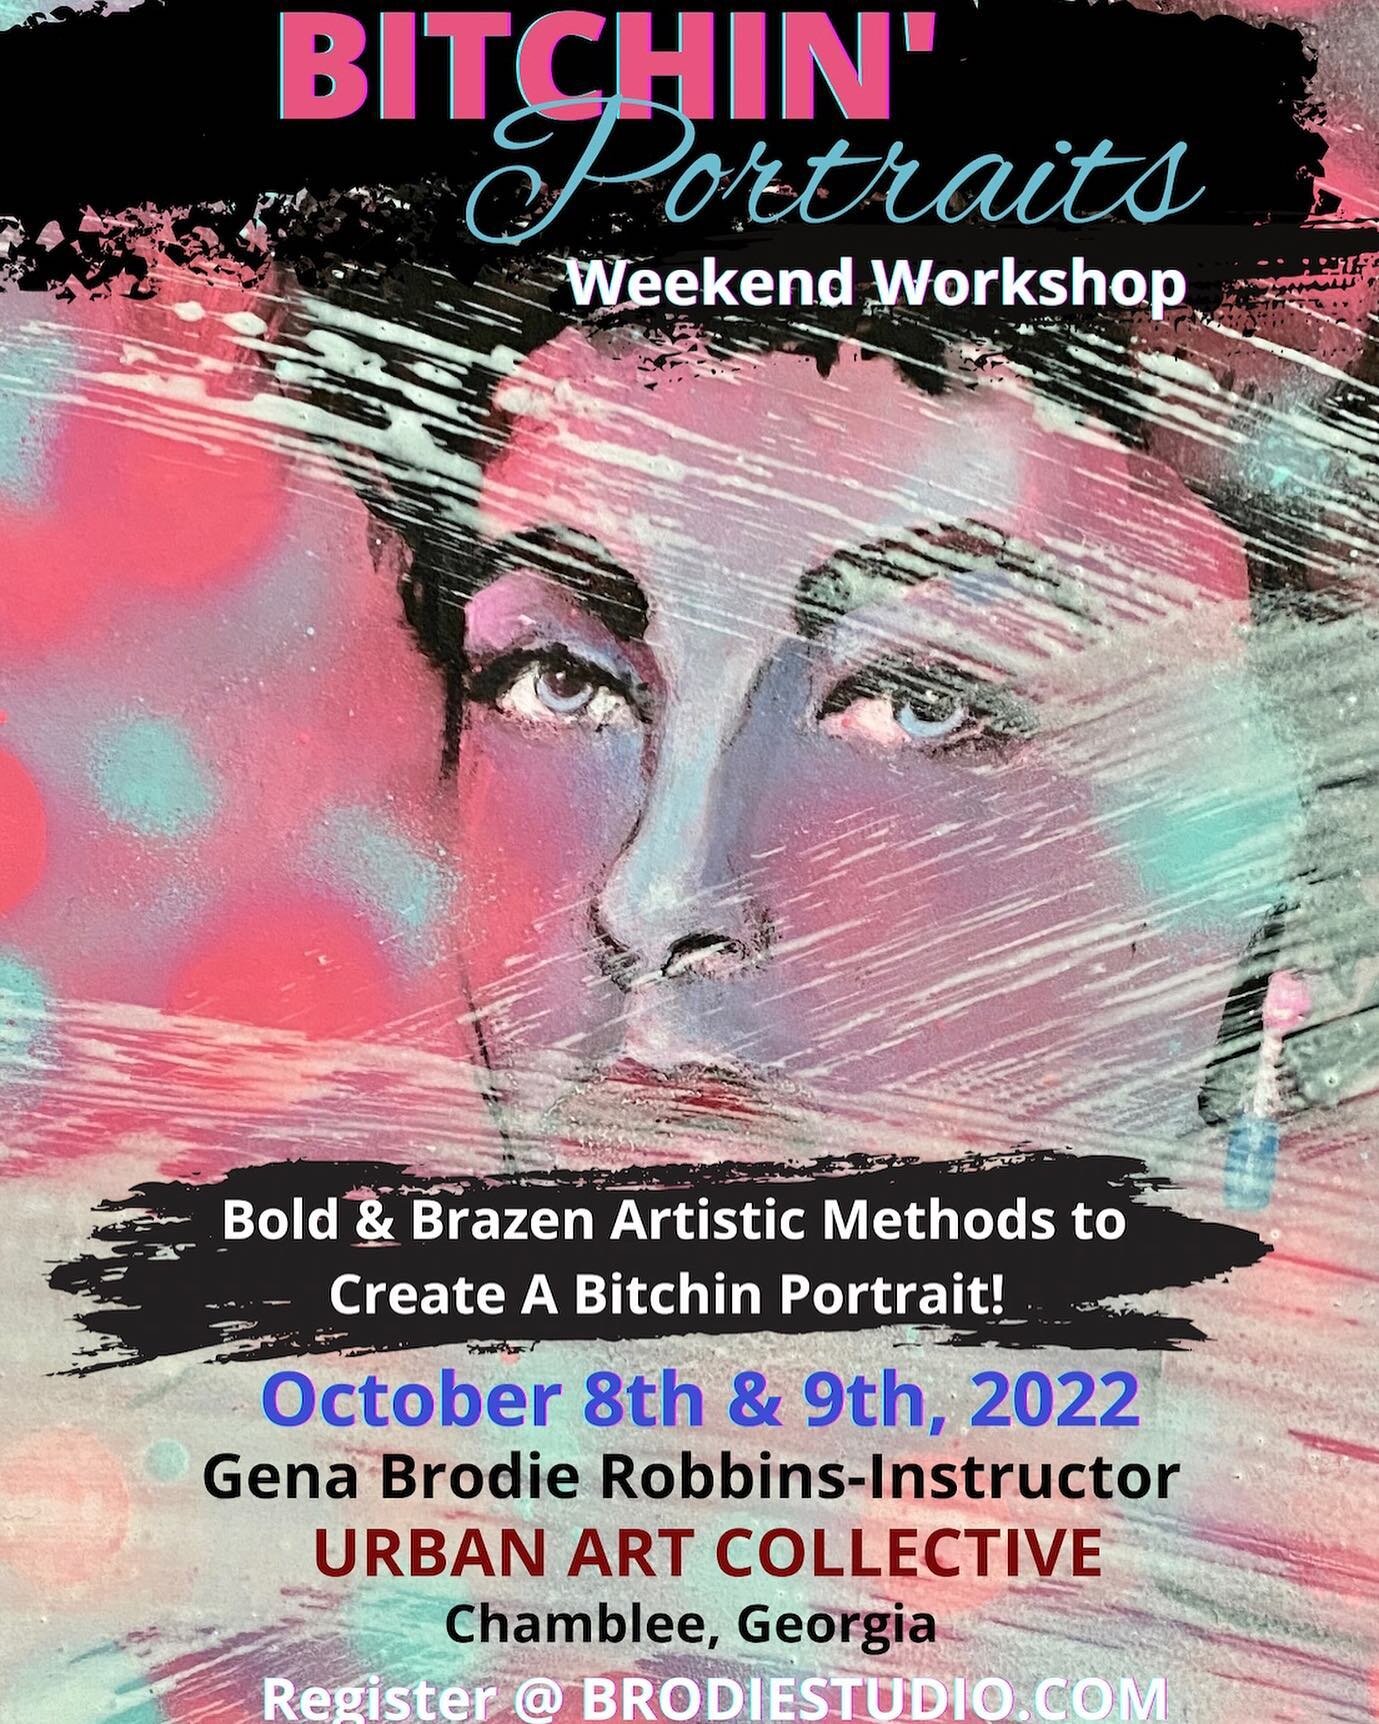 Bitchin&rsquo; Portraits Weekend Workshop! Inspired by my Resting Bitch Face Series&hellip;Yes! I have decided to offer this one of a kind weekend workshop Oct. 8th &amp; 9th at the Urban Art Collective. The cost is $285 and includes some materials. 